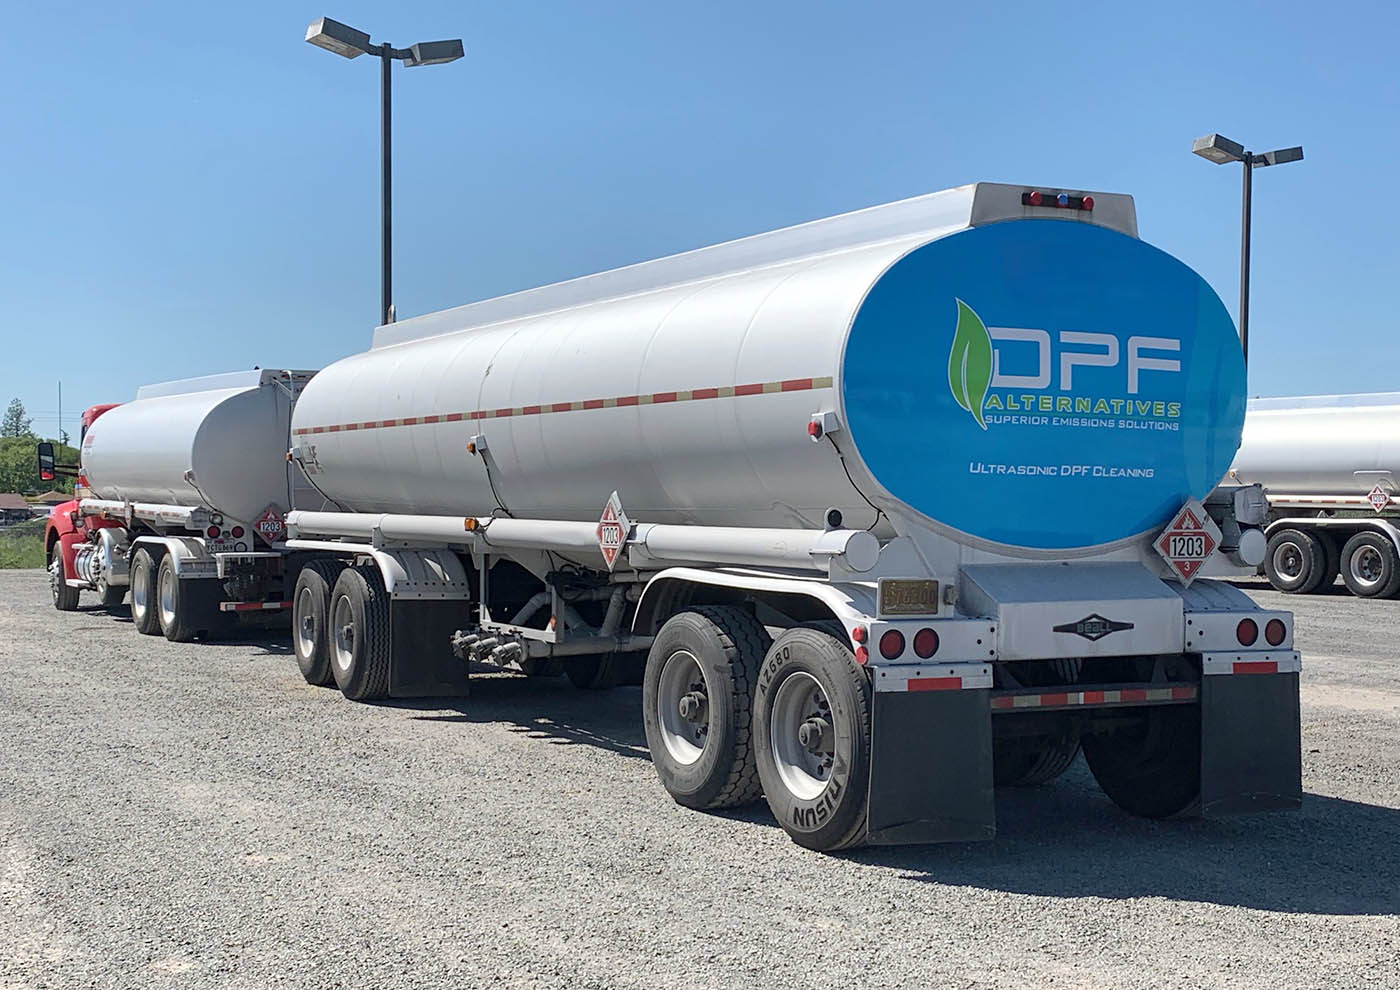 Back of a clean, large, reflective semi truck rig, contact DPF Alternatives for a DPF cleaner in your local area.